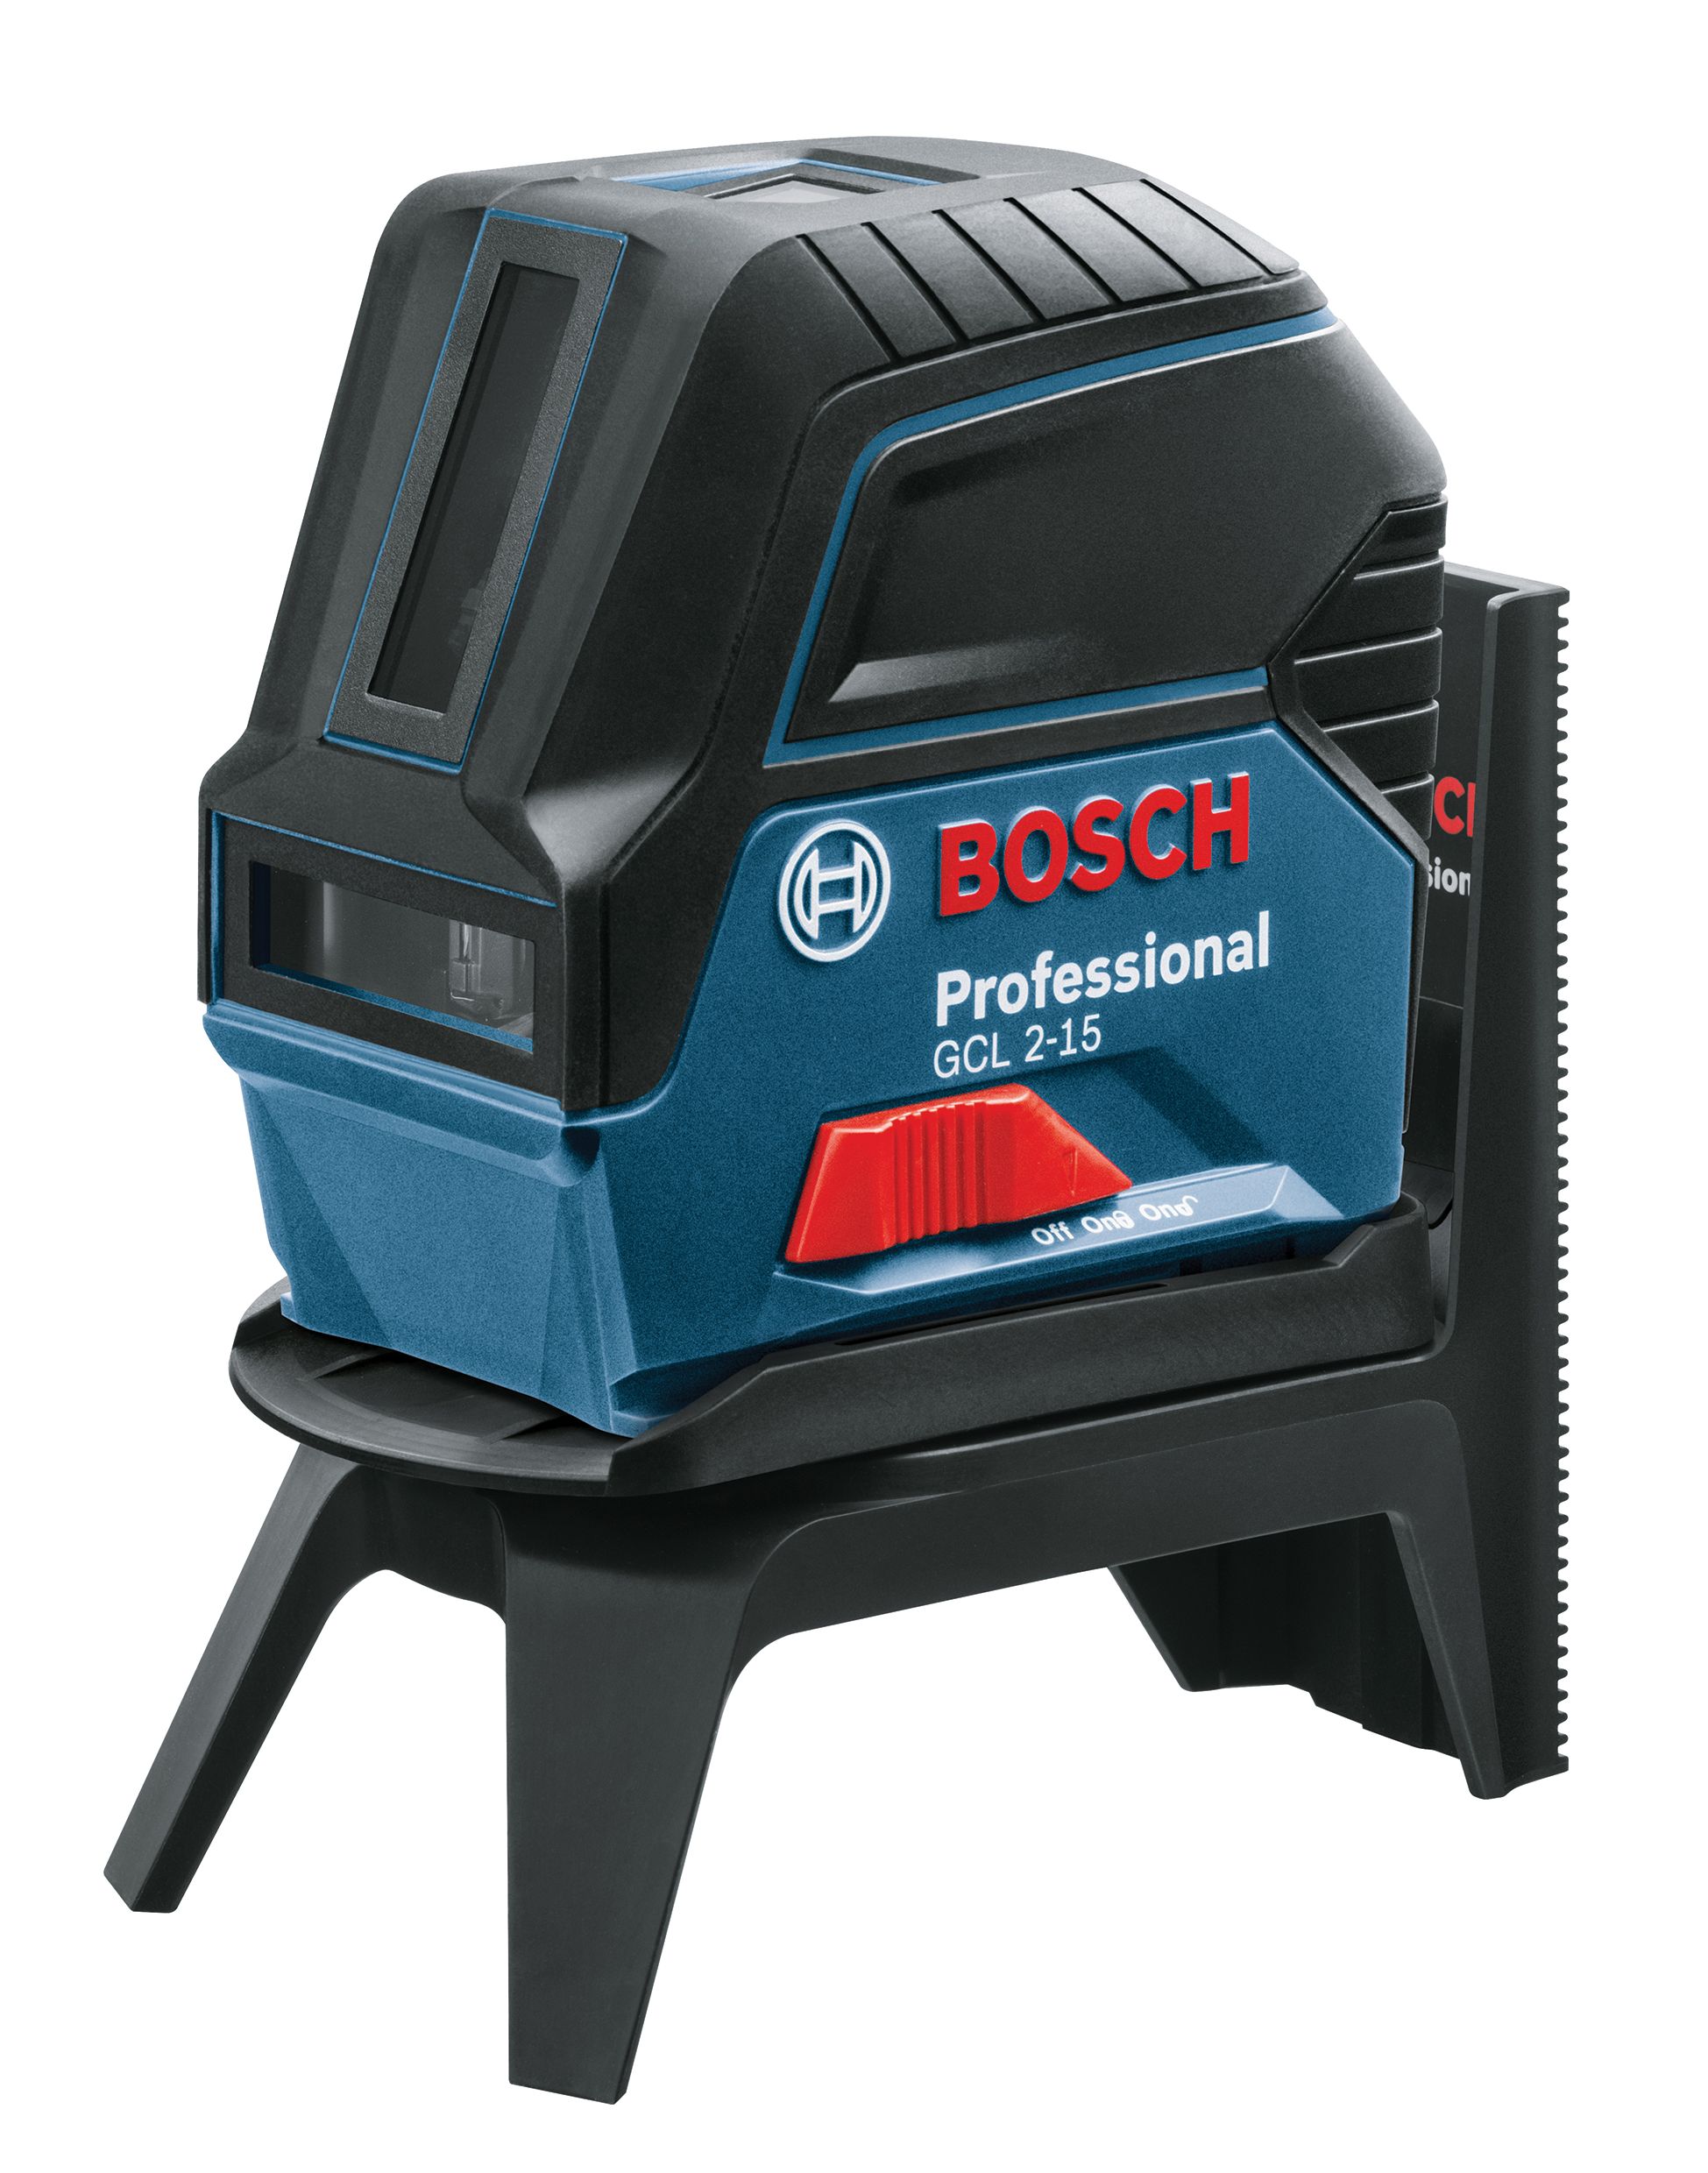 Image of Bosch Professional GCL 2-15 Combi Laser Level